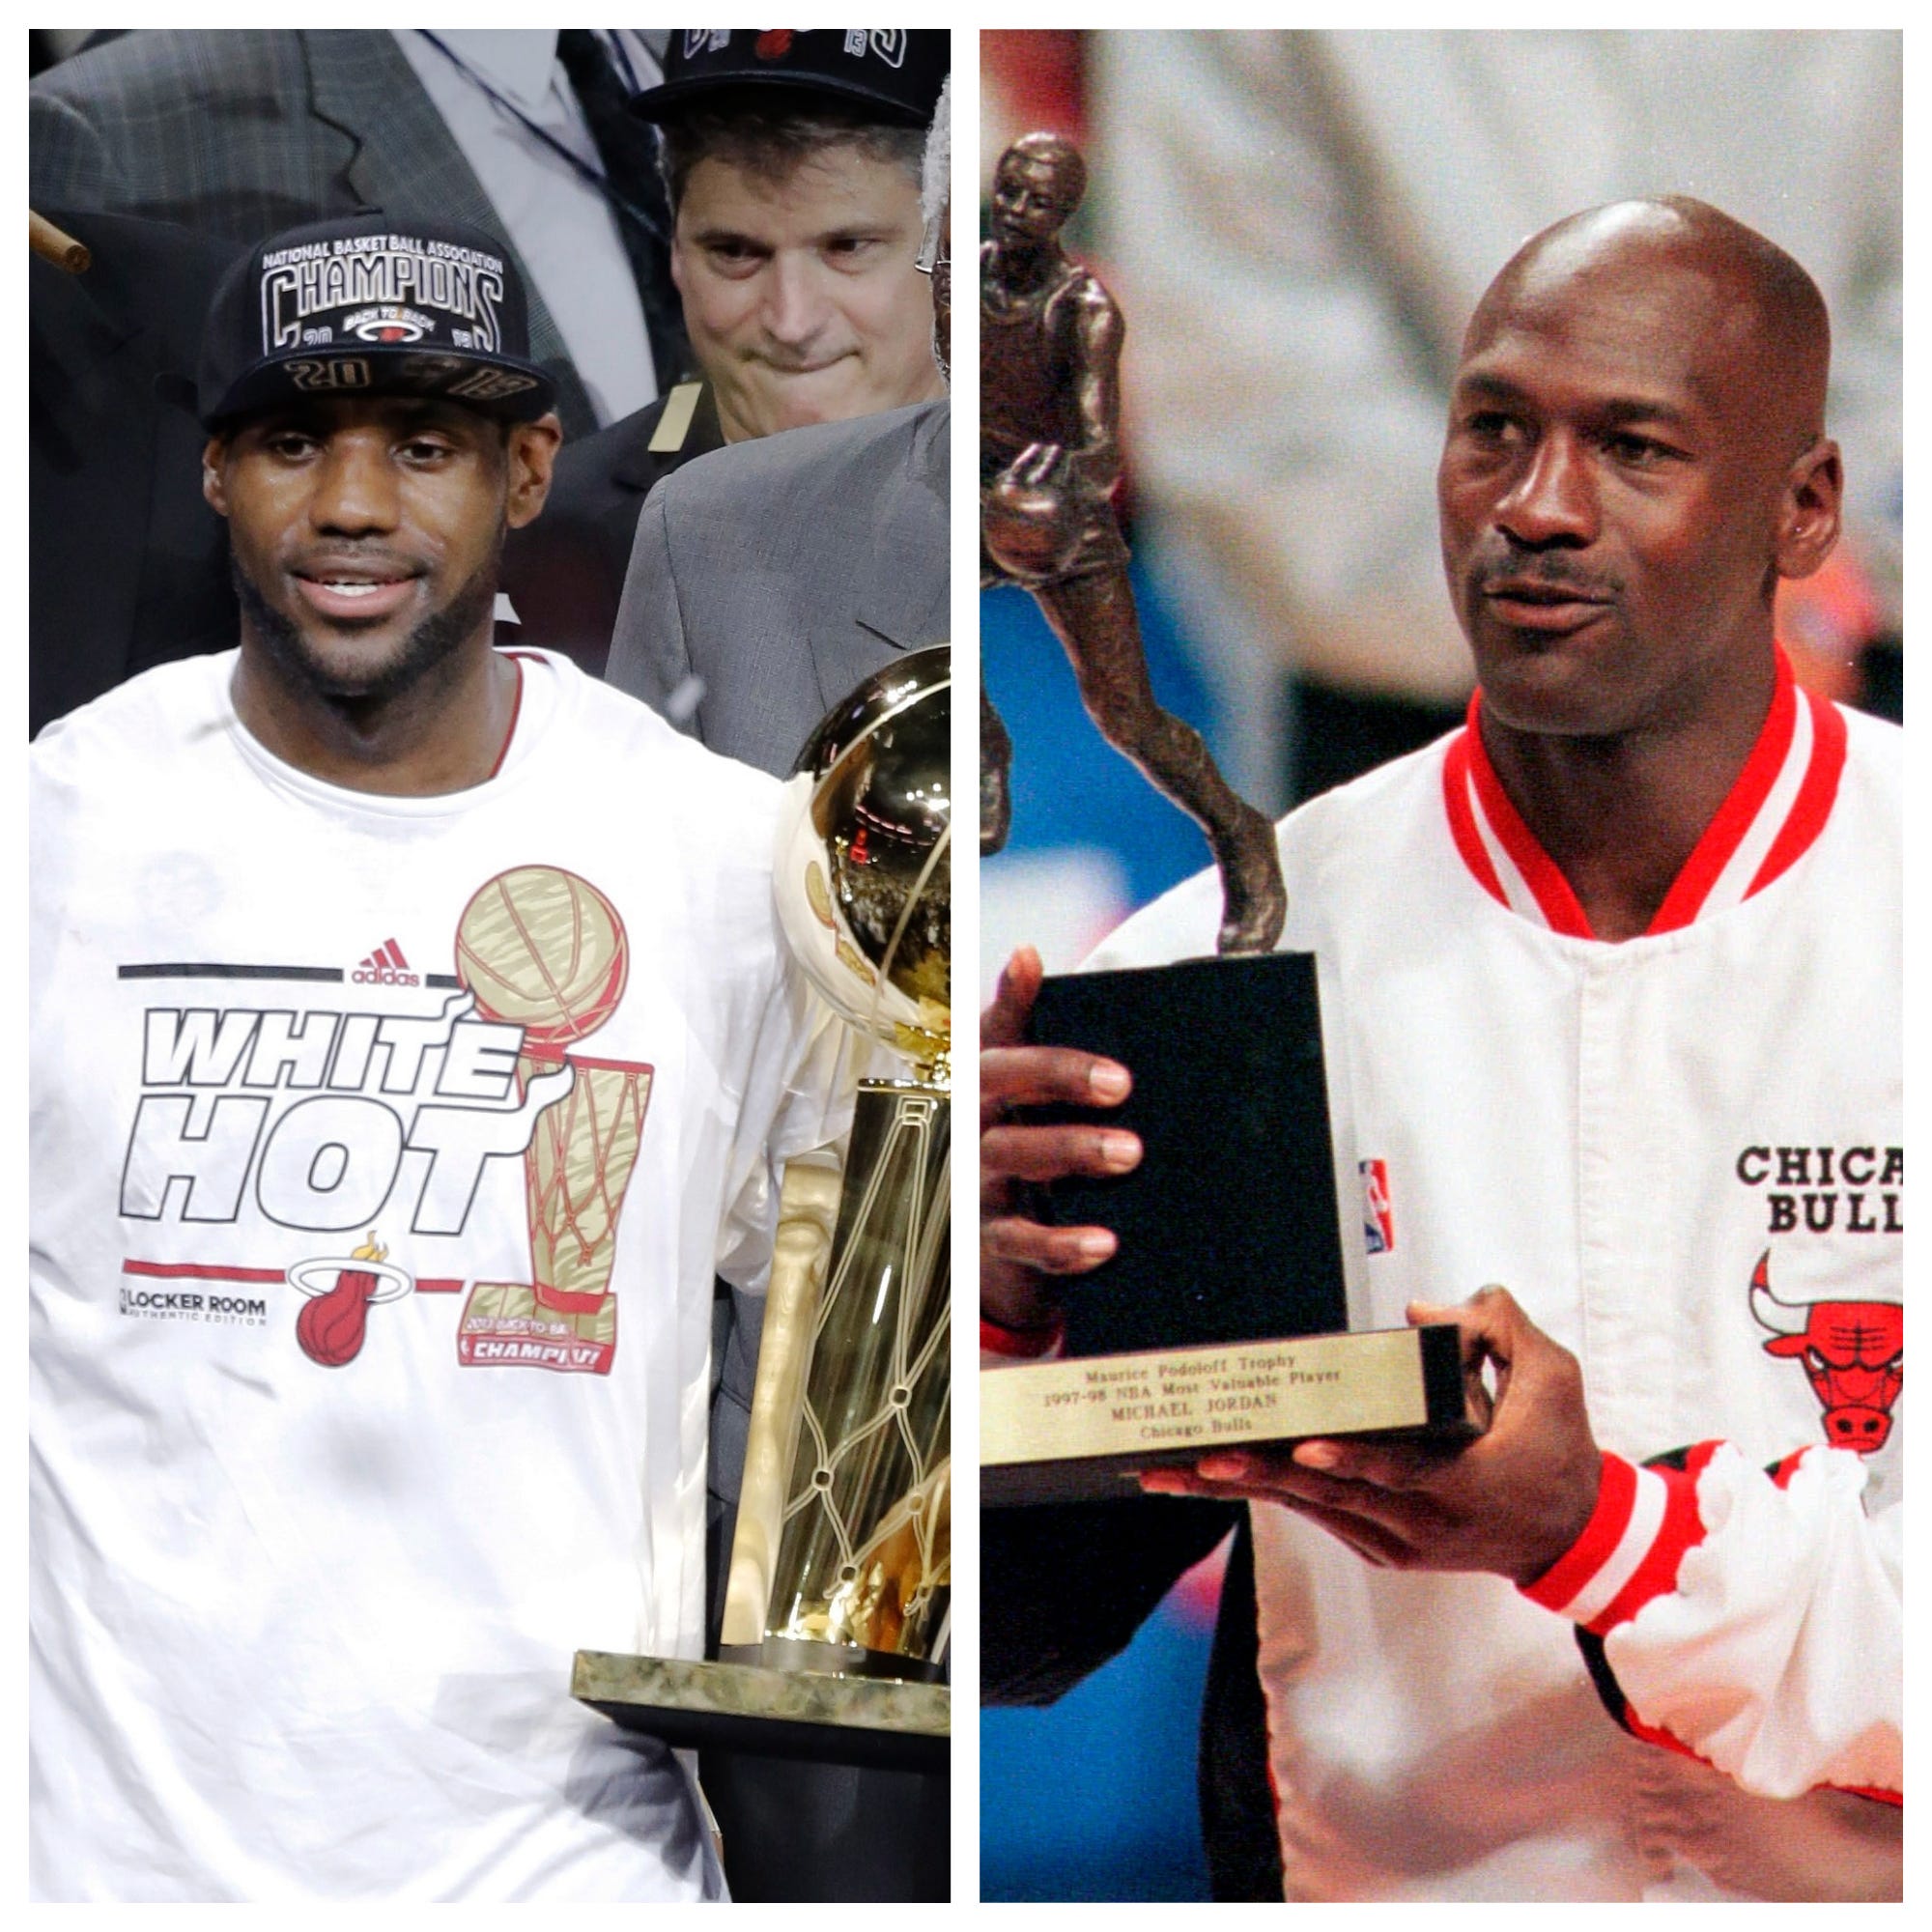 NBA 75: Top 75 NBA players of all time, from MJ and LeBron to